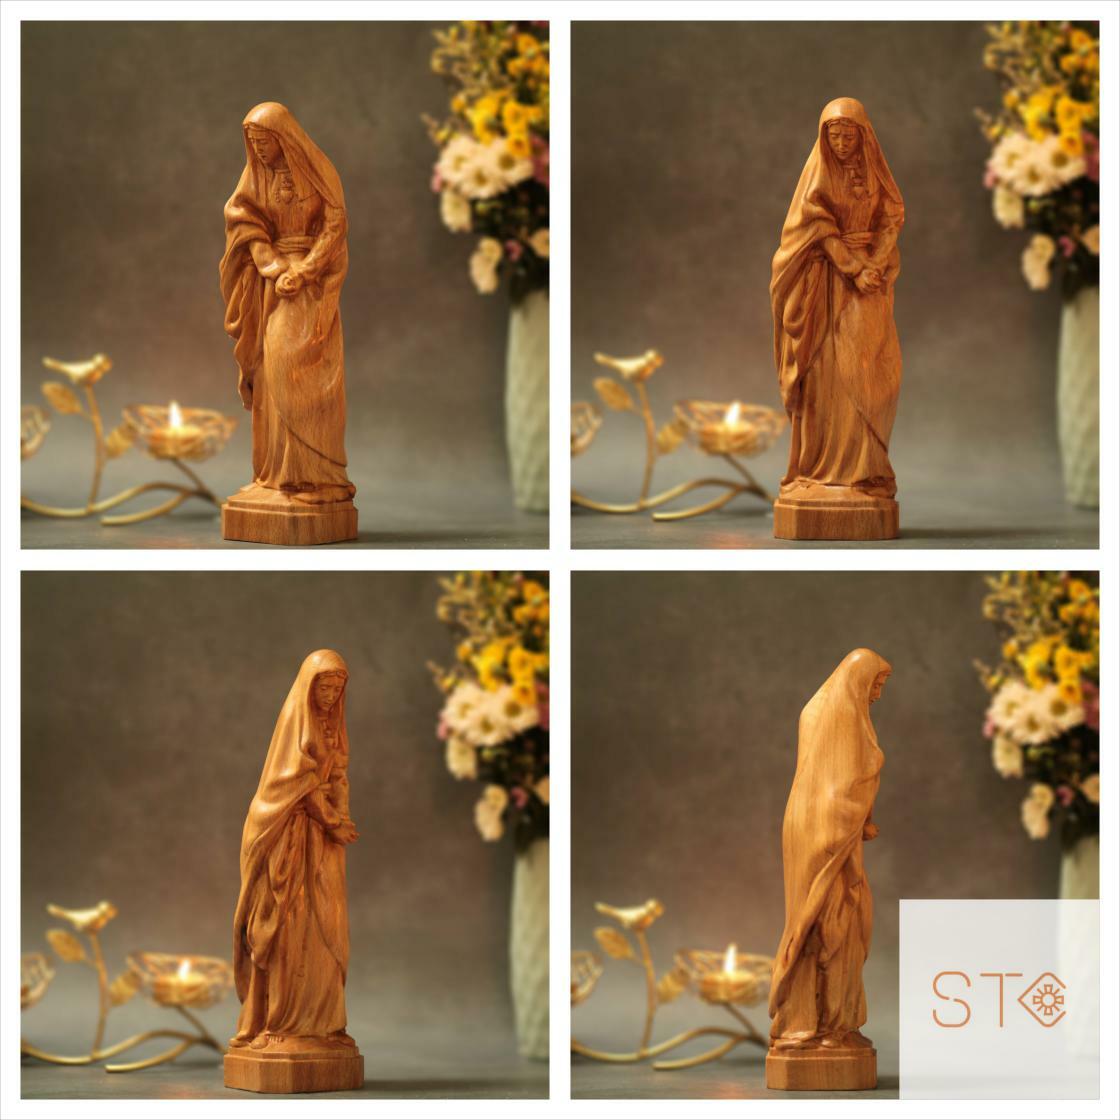 Unmissable! Check out this 11.8 Inches Statue of Our Lady of Sorrows Wood Carving Catholic Statue Virgin Mary Christian Art New Home Gift Christmas Gift Religious Gift only at $99.90. 
suticraftshop.etsy.com/listing/125265…
#MaryStatue #MothersDayGift